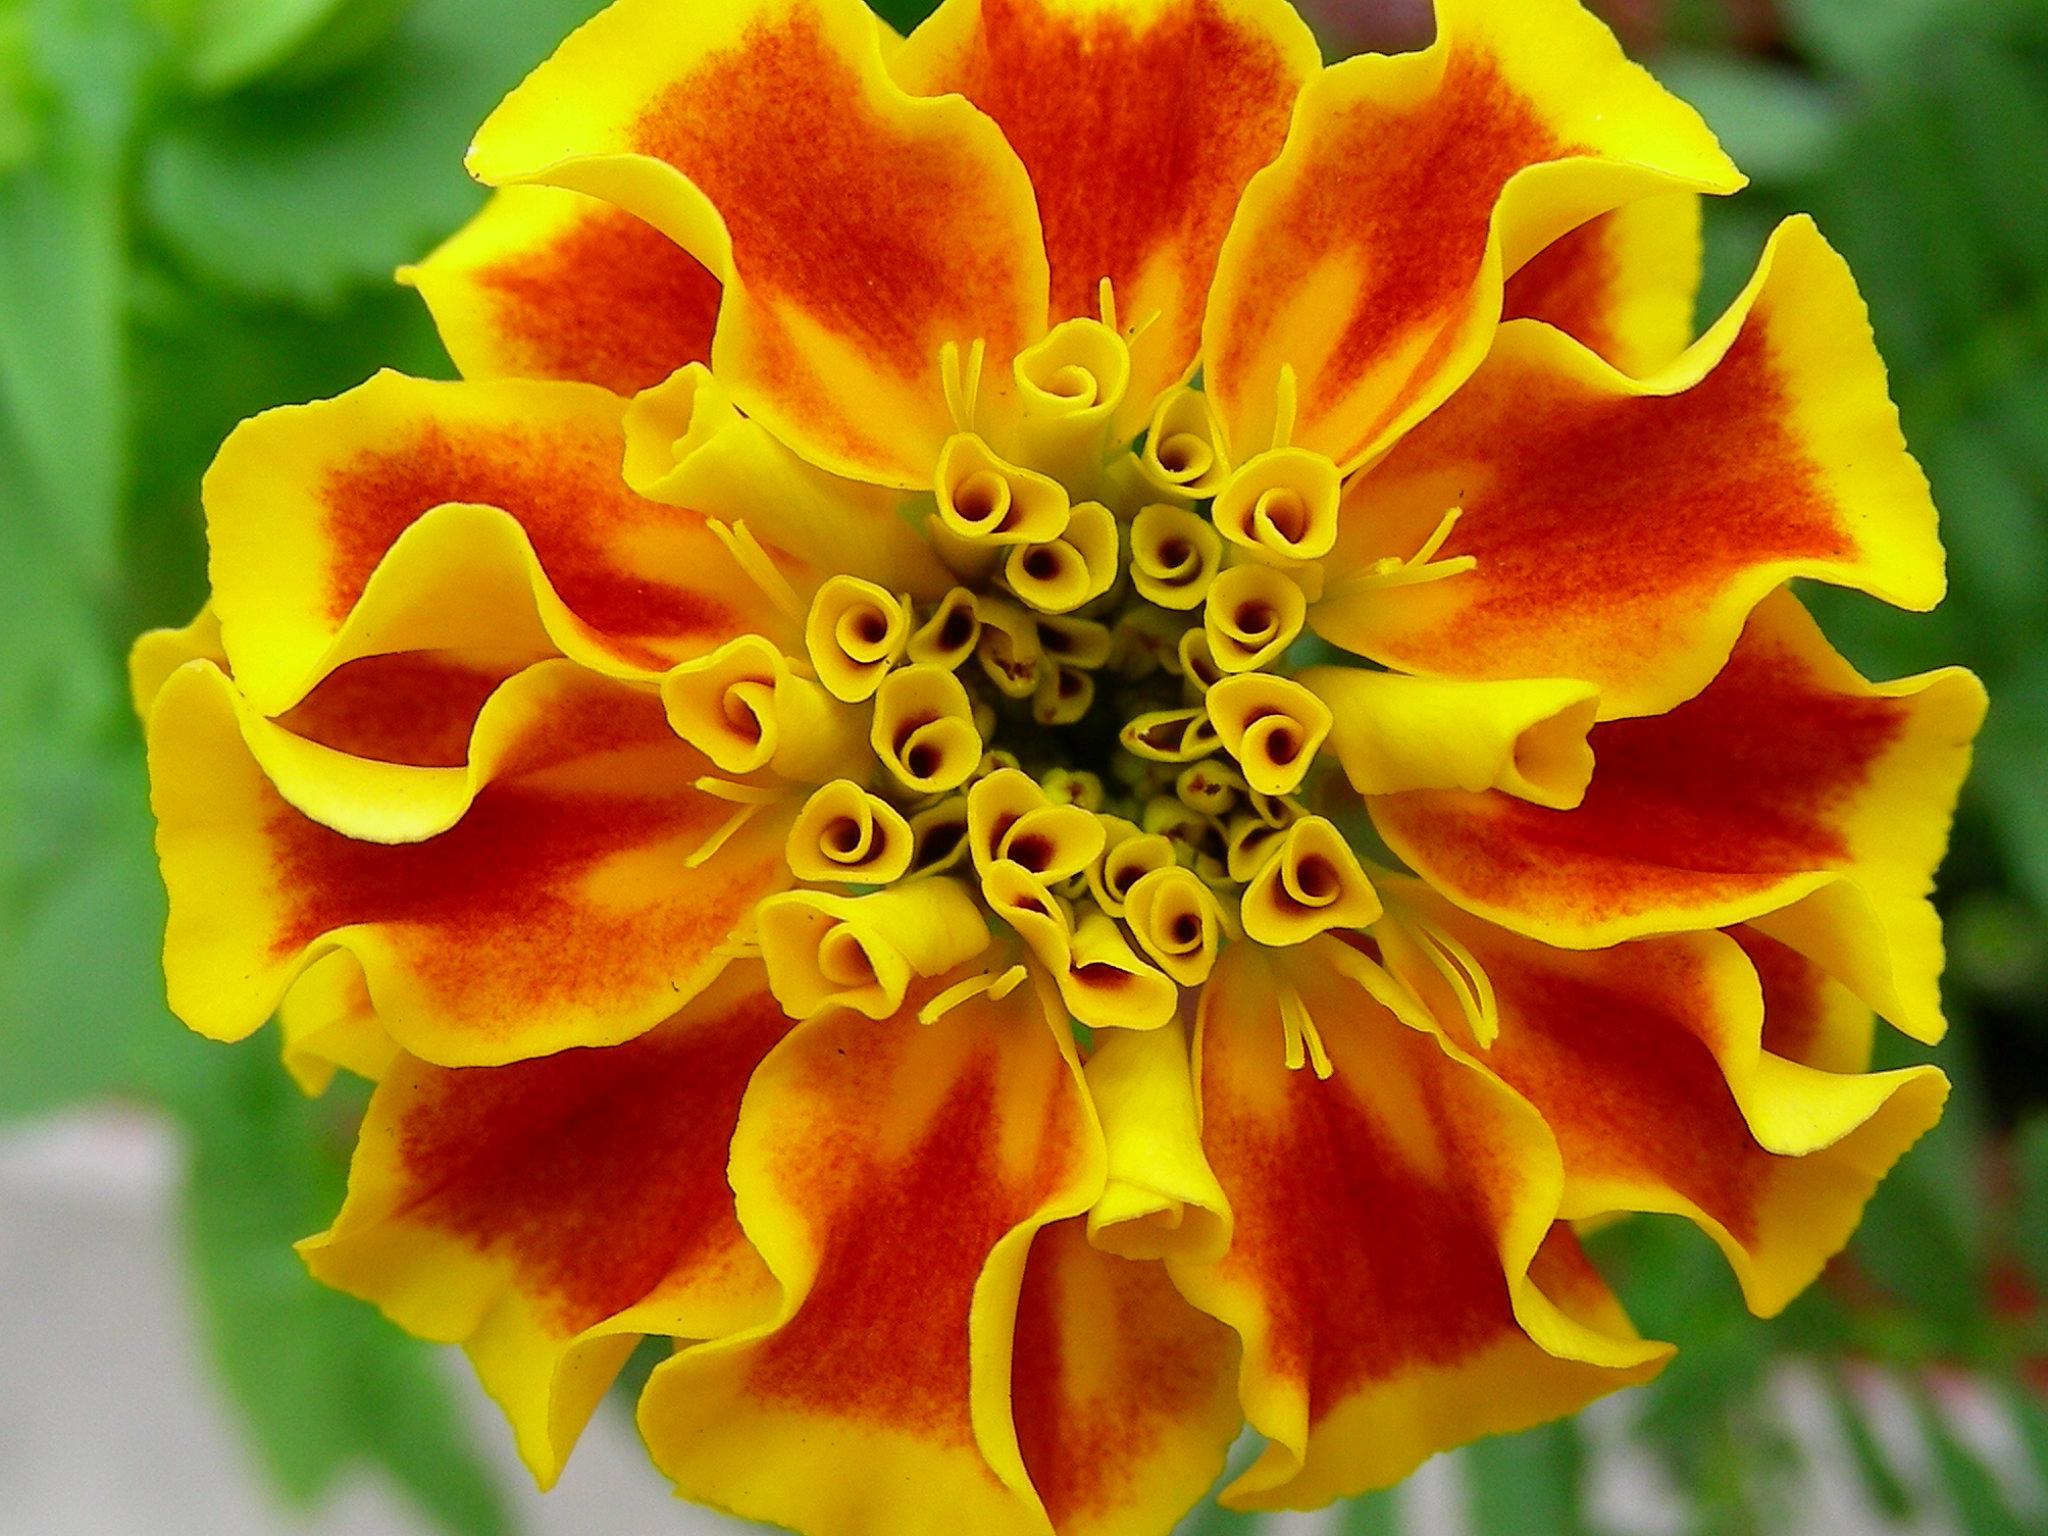 this is a yellow and red flower with lots of other flowers